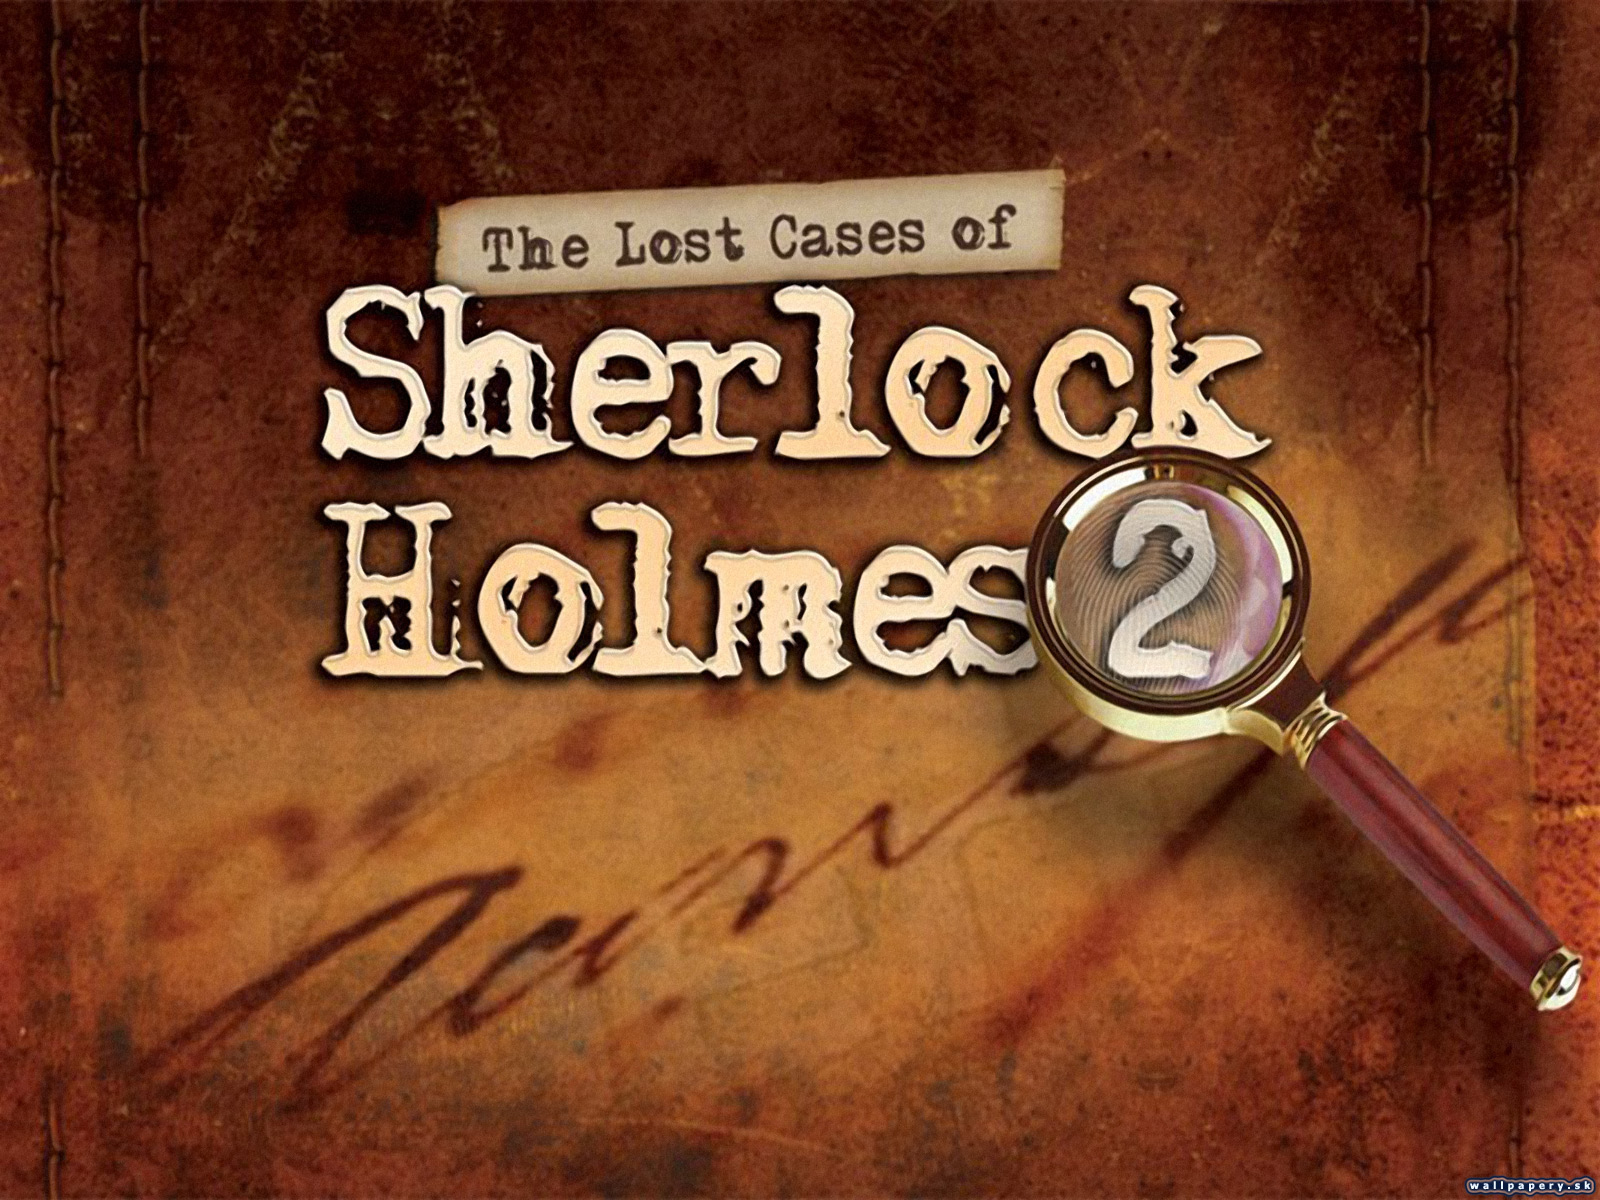 The Lost Cases of Sherlock Holmes 2 - wallpaper 1